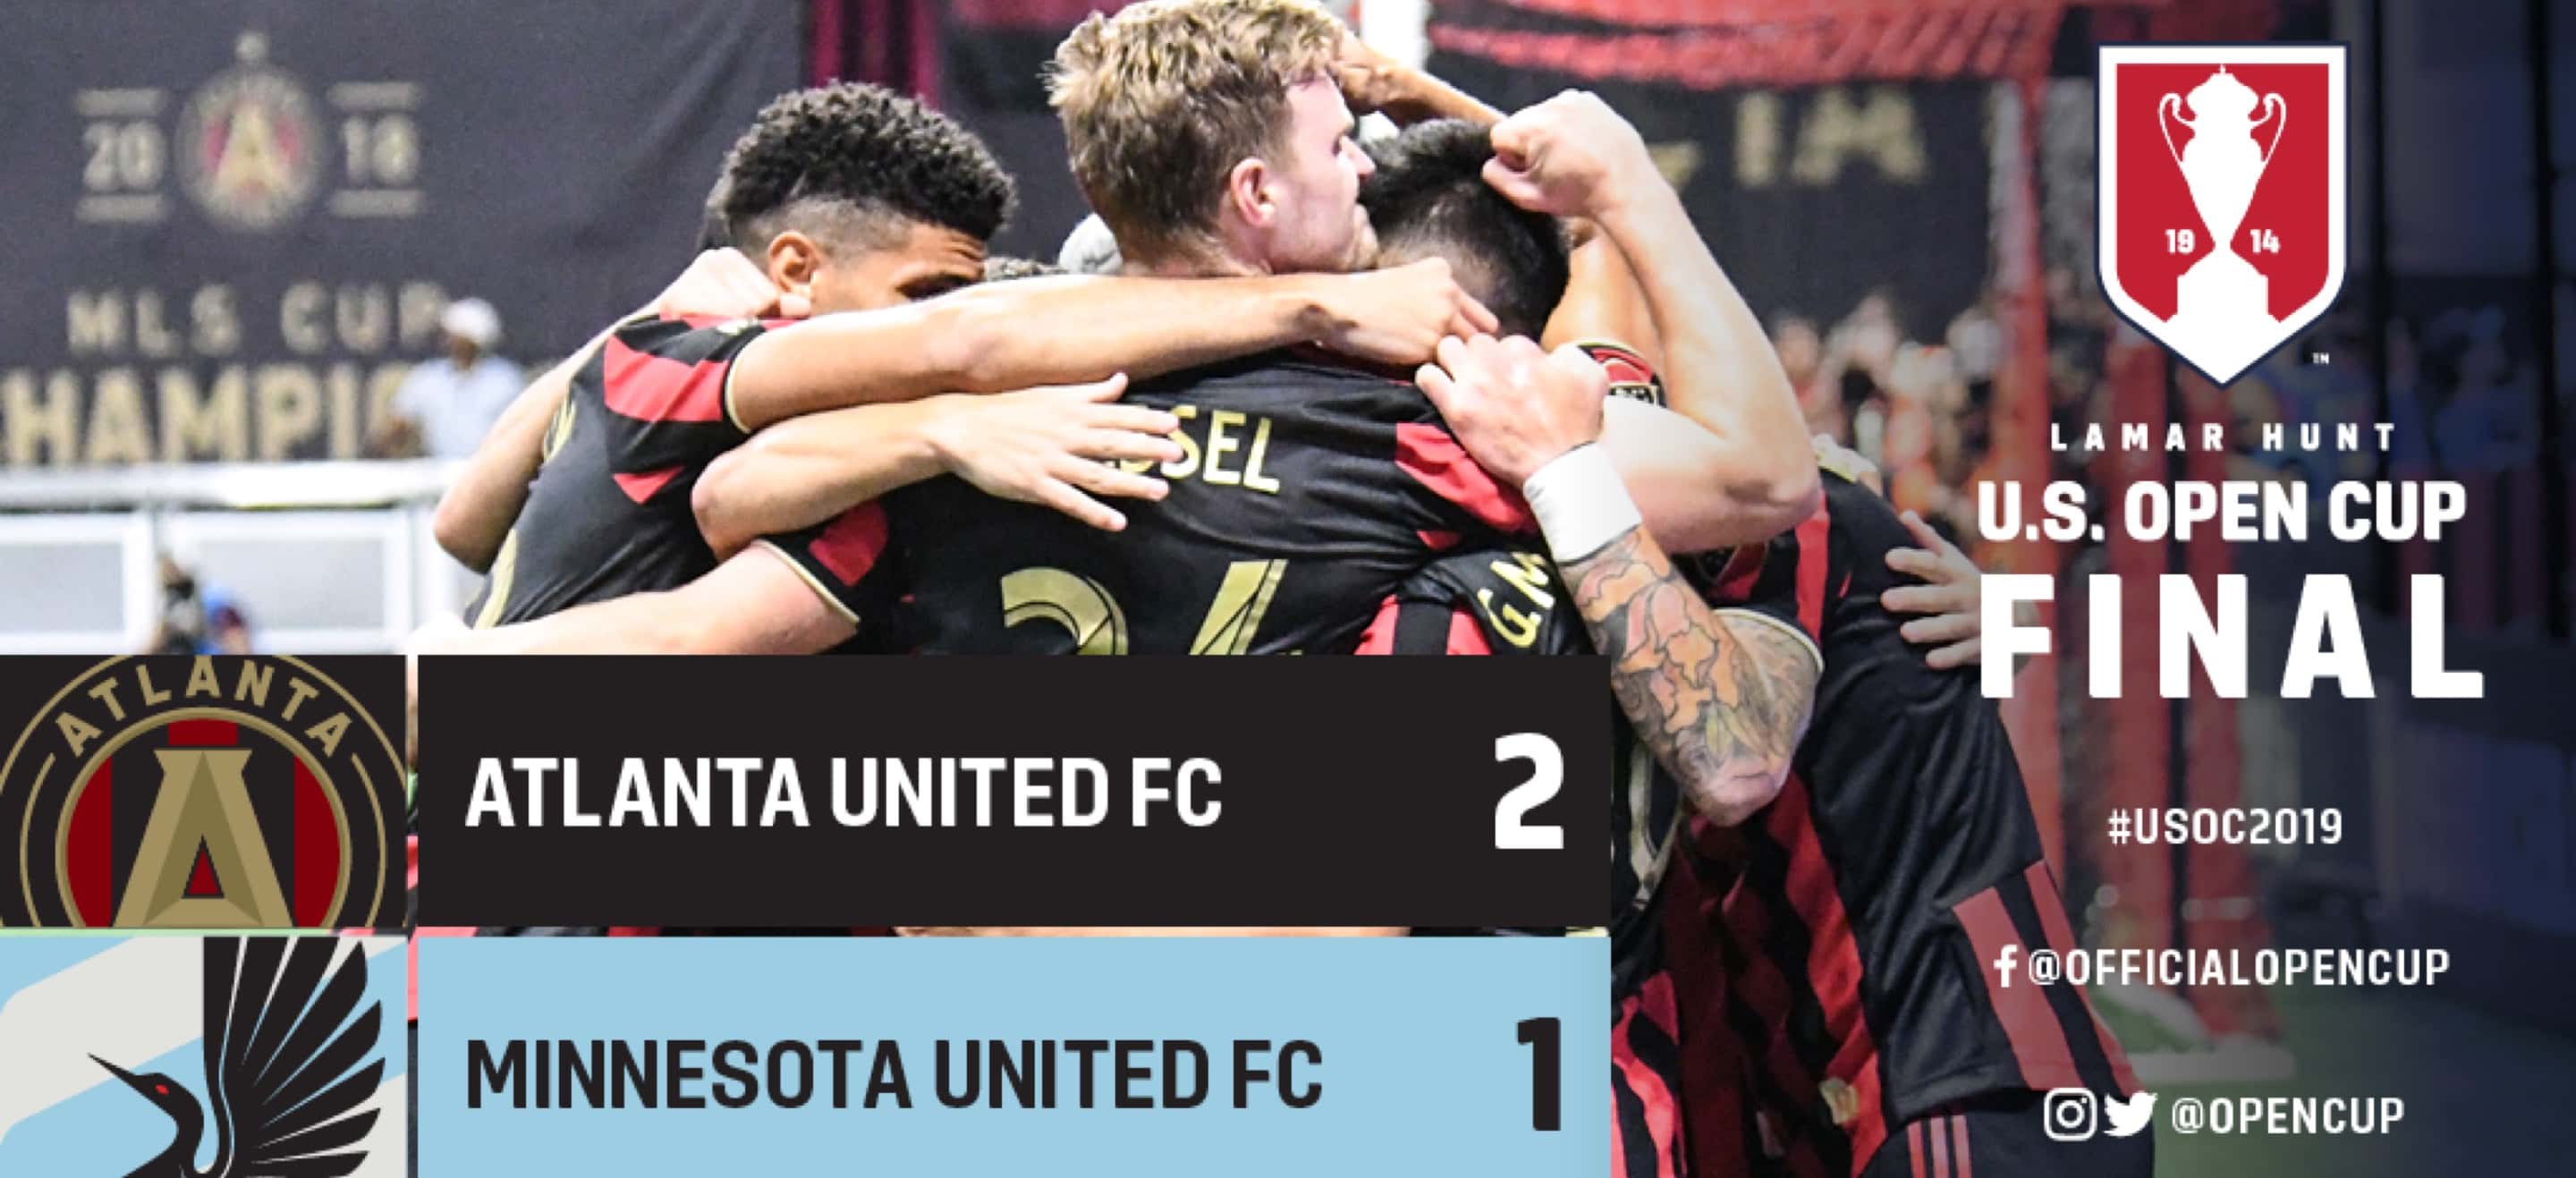 US Open Cup 2019: Atlanta United wins title, adds to trophy count